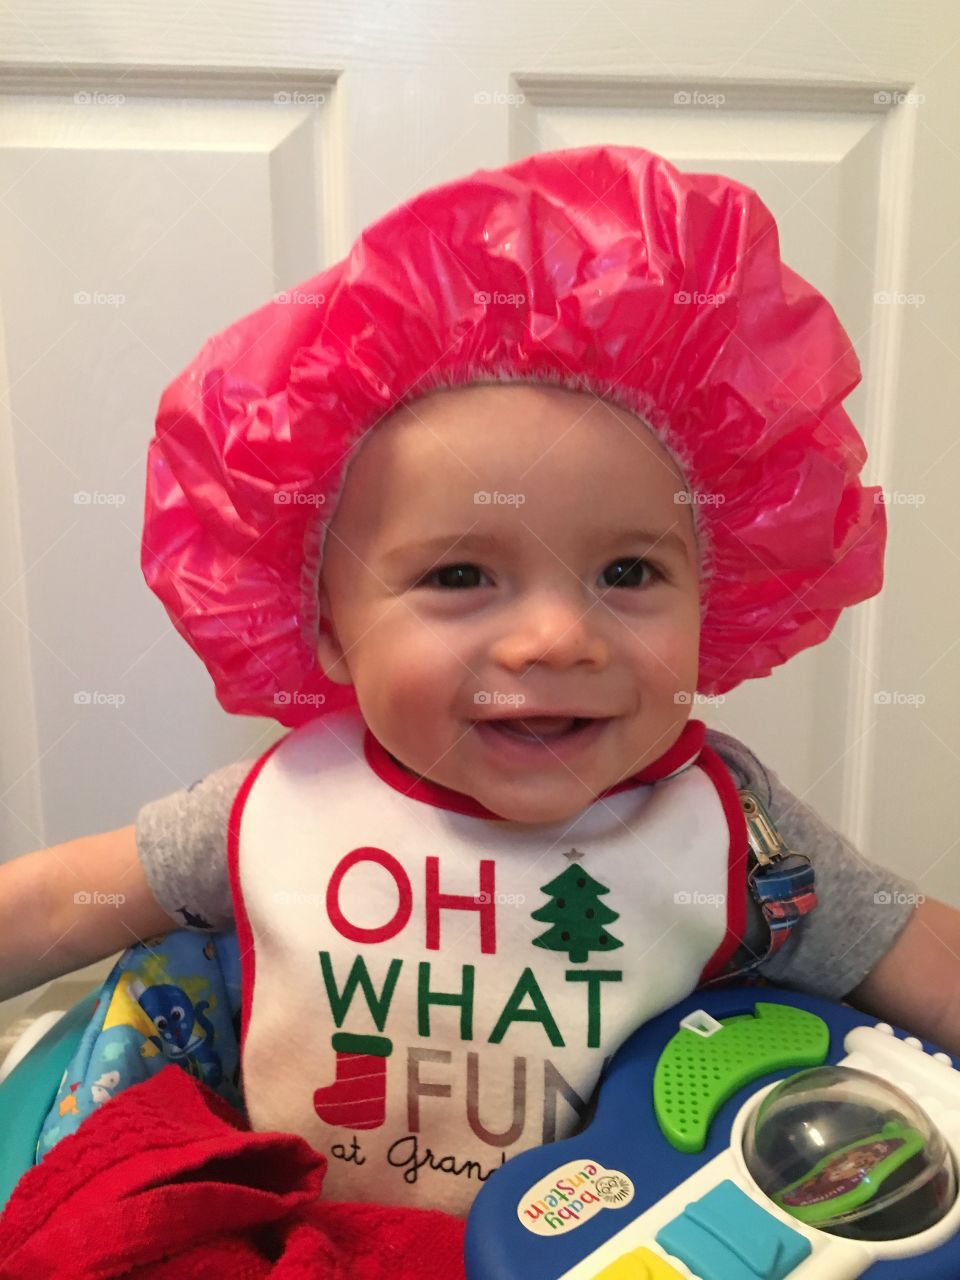 A little fun with mom's shower cap lol 